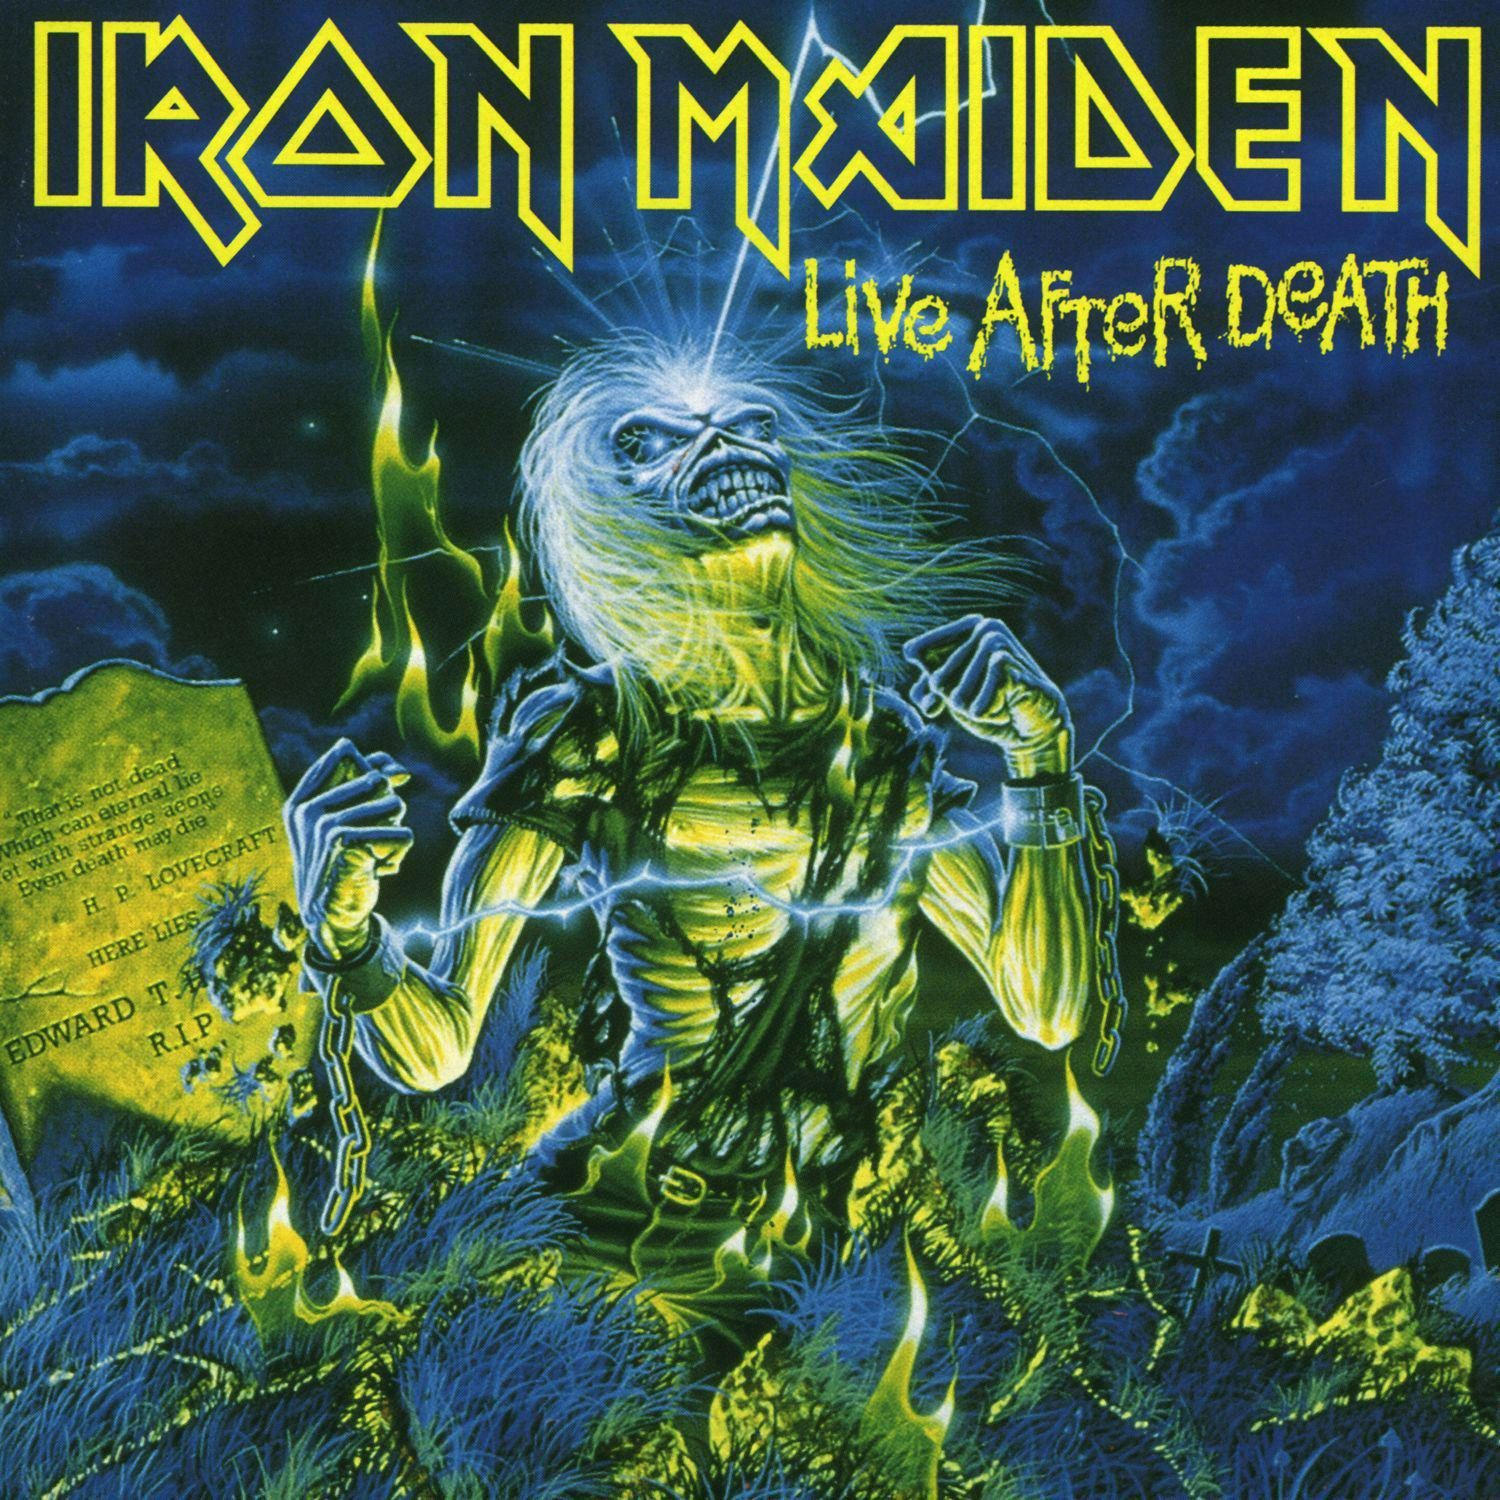 Iron Maiden Live After Death Vinyl Record